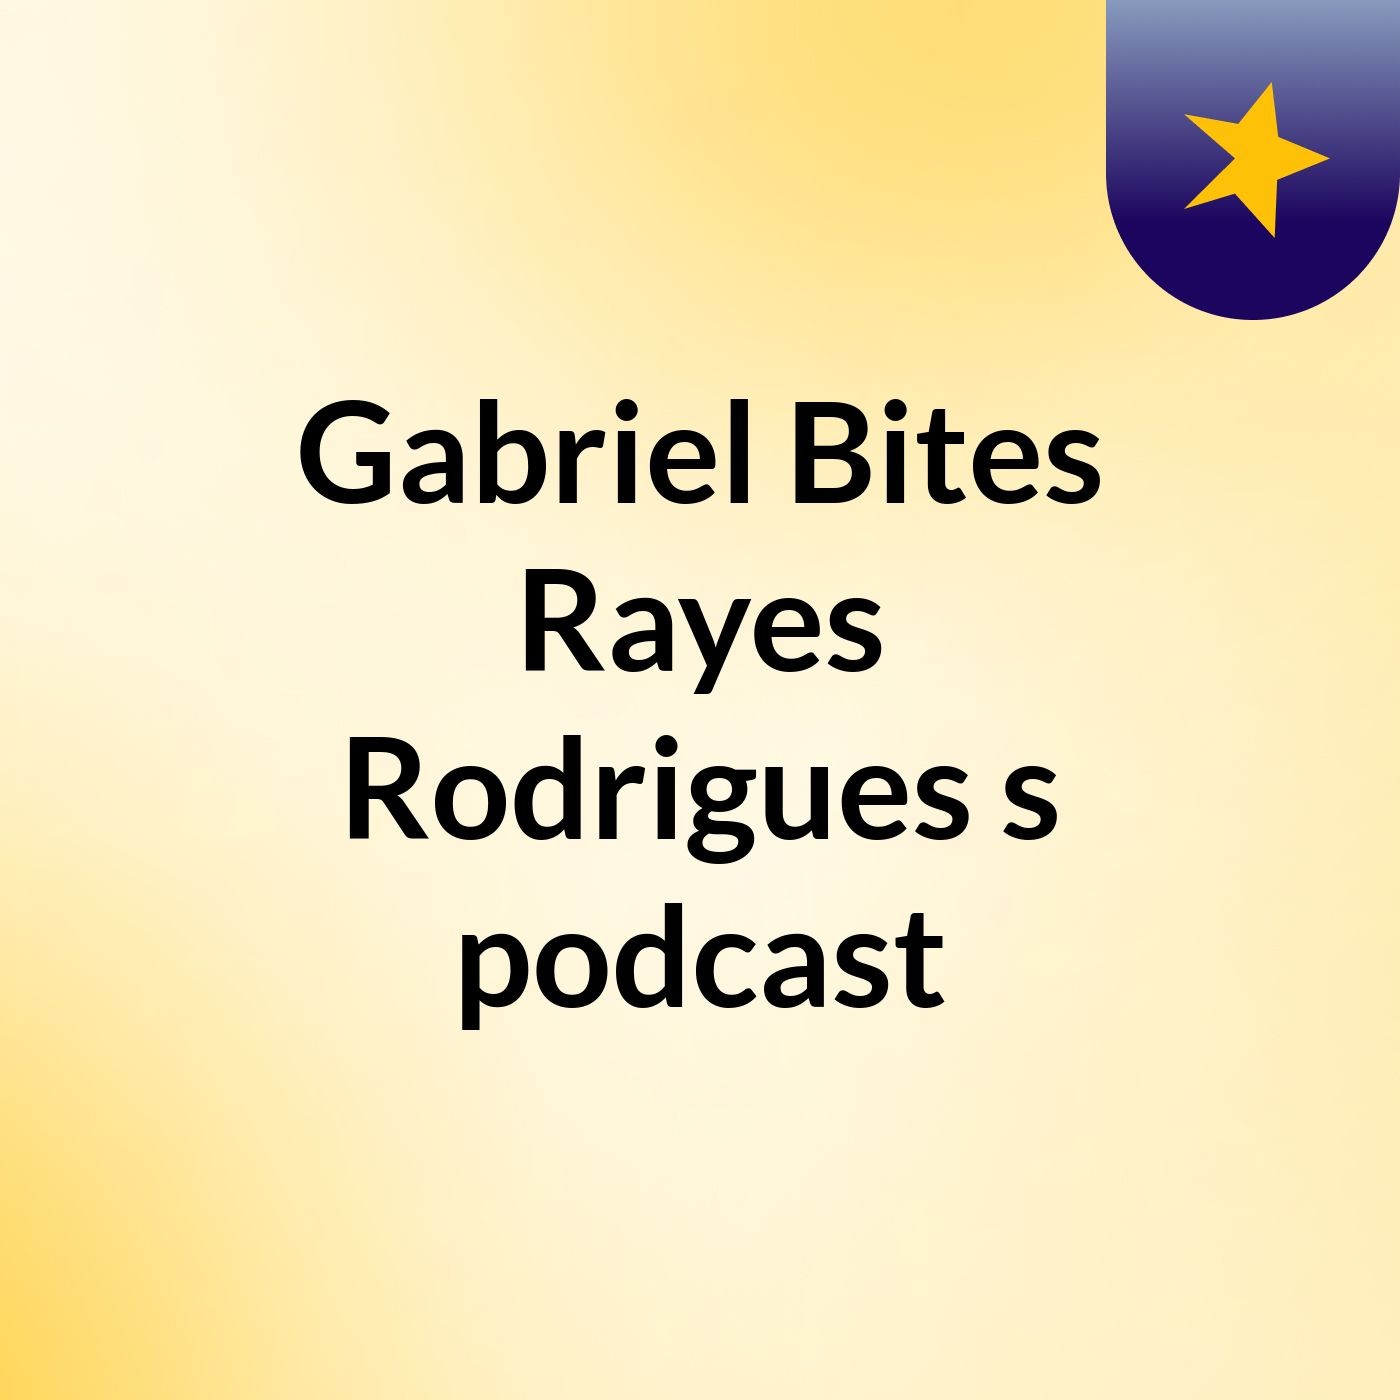 Gabriel Bites Rayes Rodrigues 's podcast